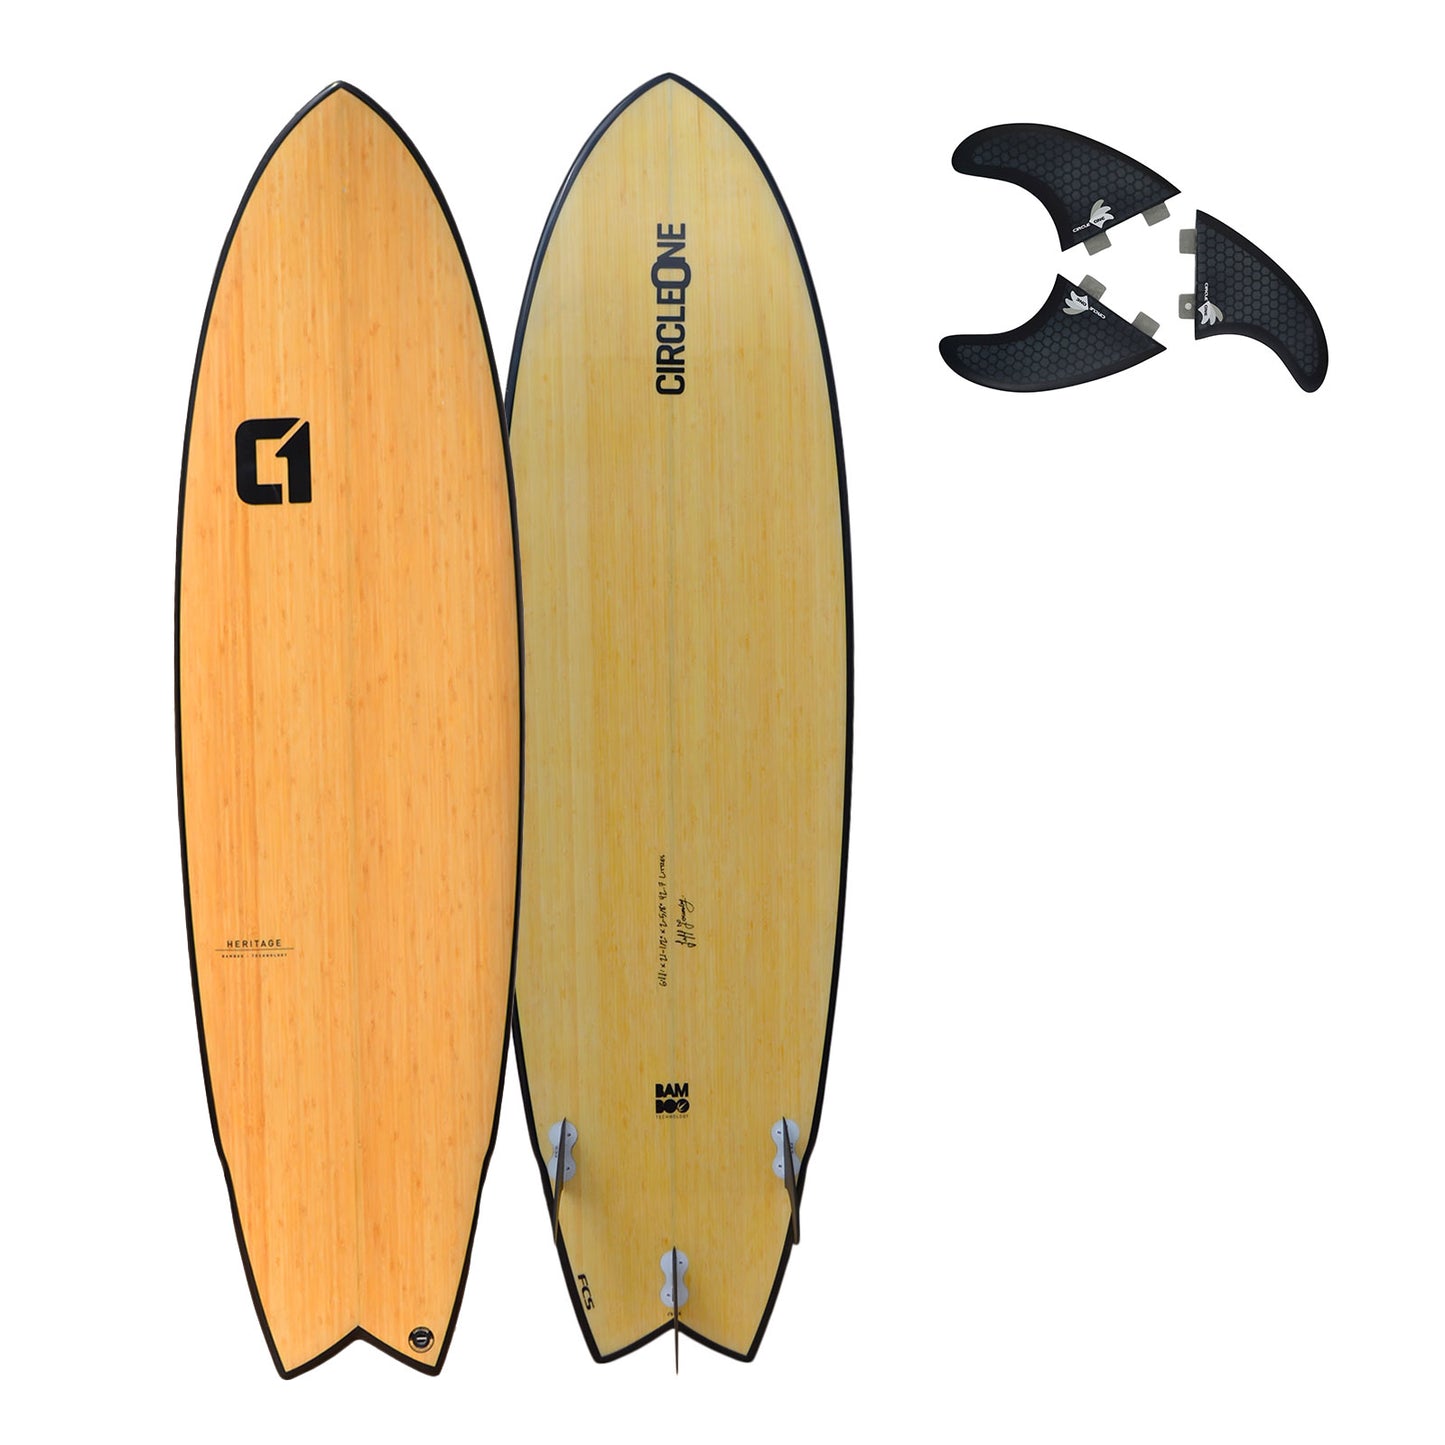 6′ 11″ Bamboo Wing Swallow Tail Surfboard Package – Includes Bag, Leash, Fins & Wax